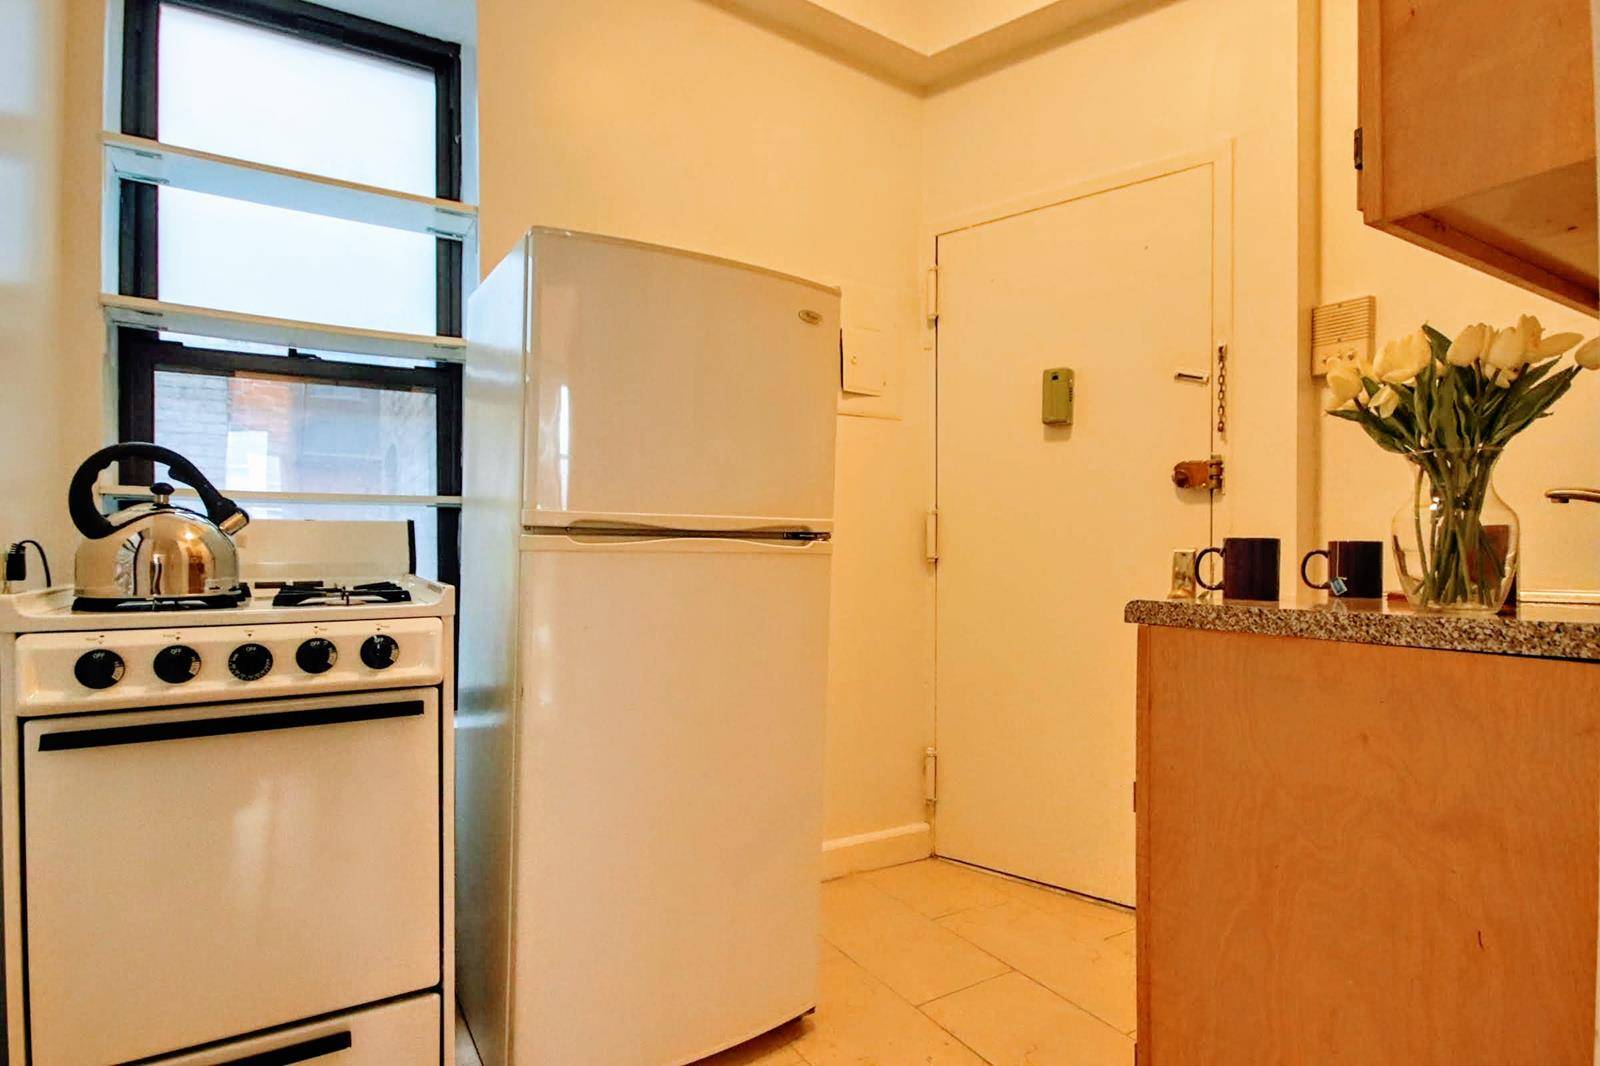 1BR Walk Up Apartment in Greenwich Village. Act Now!